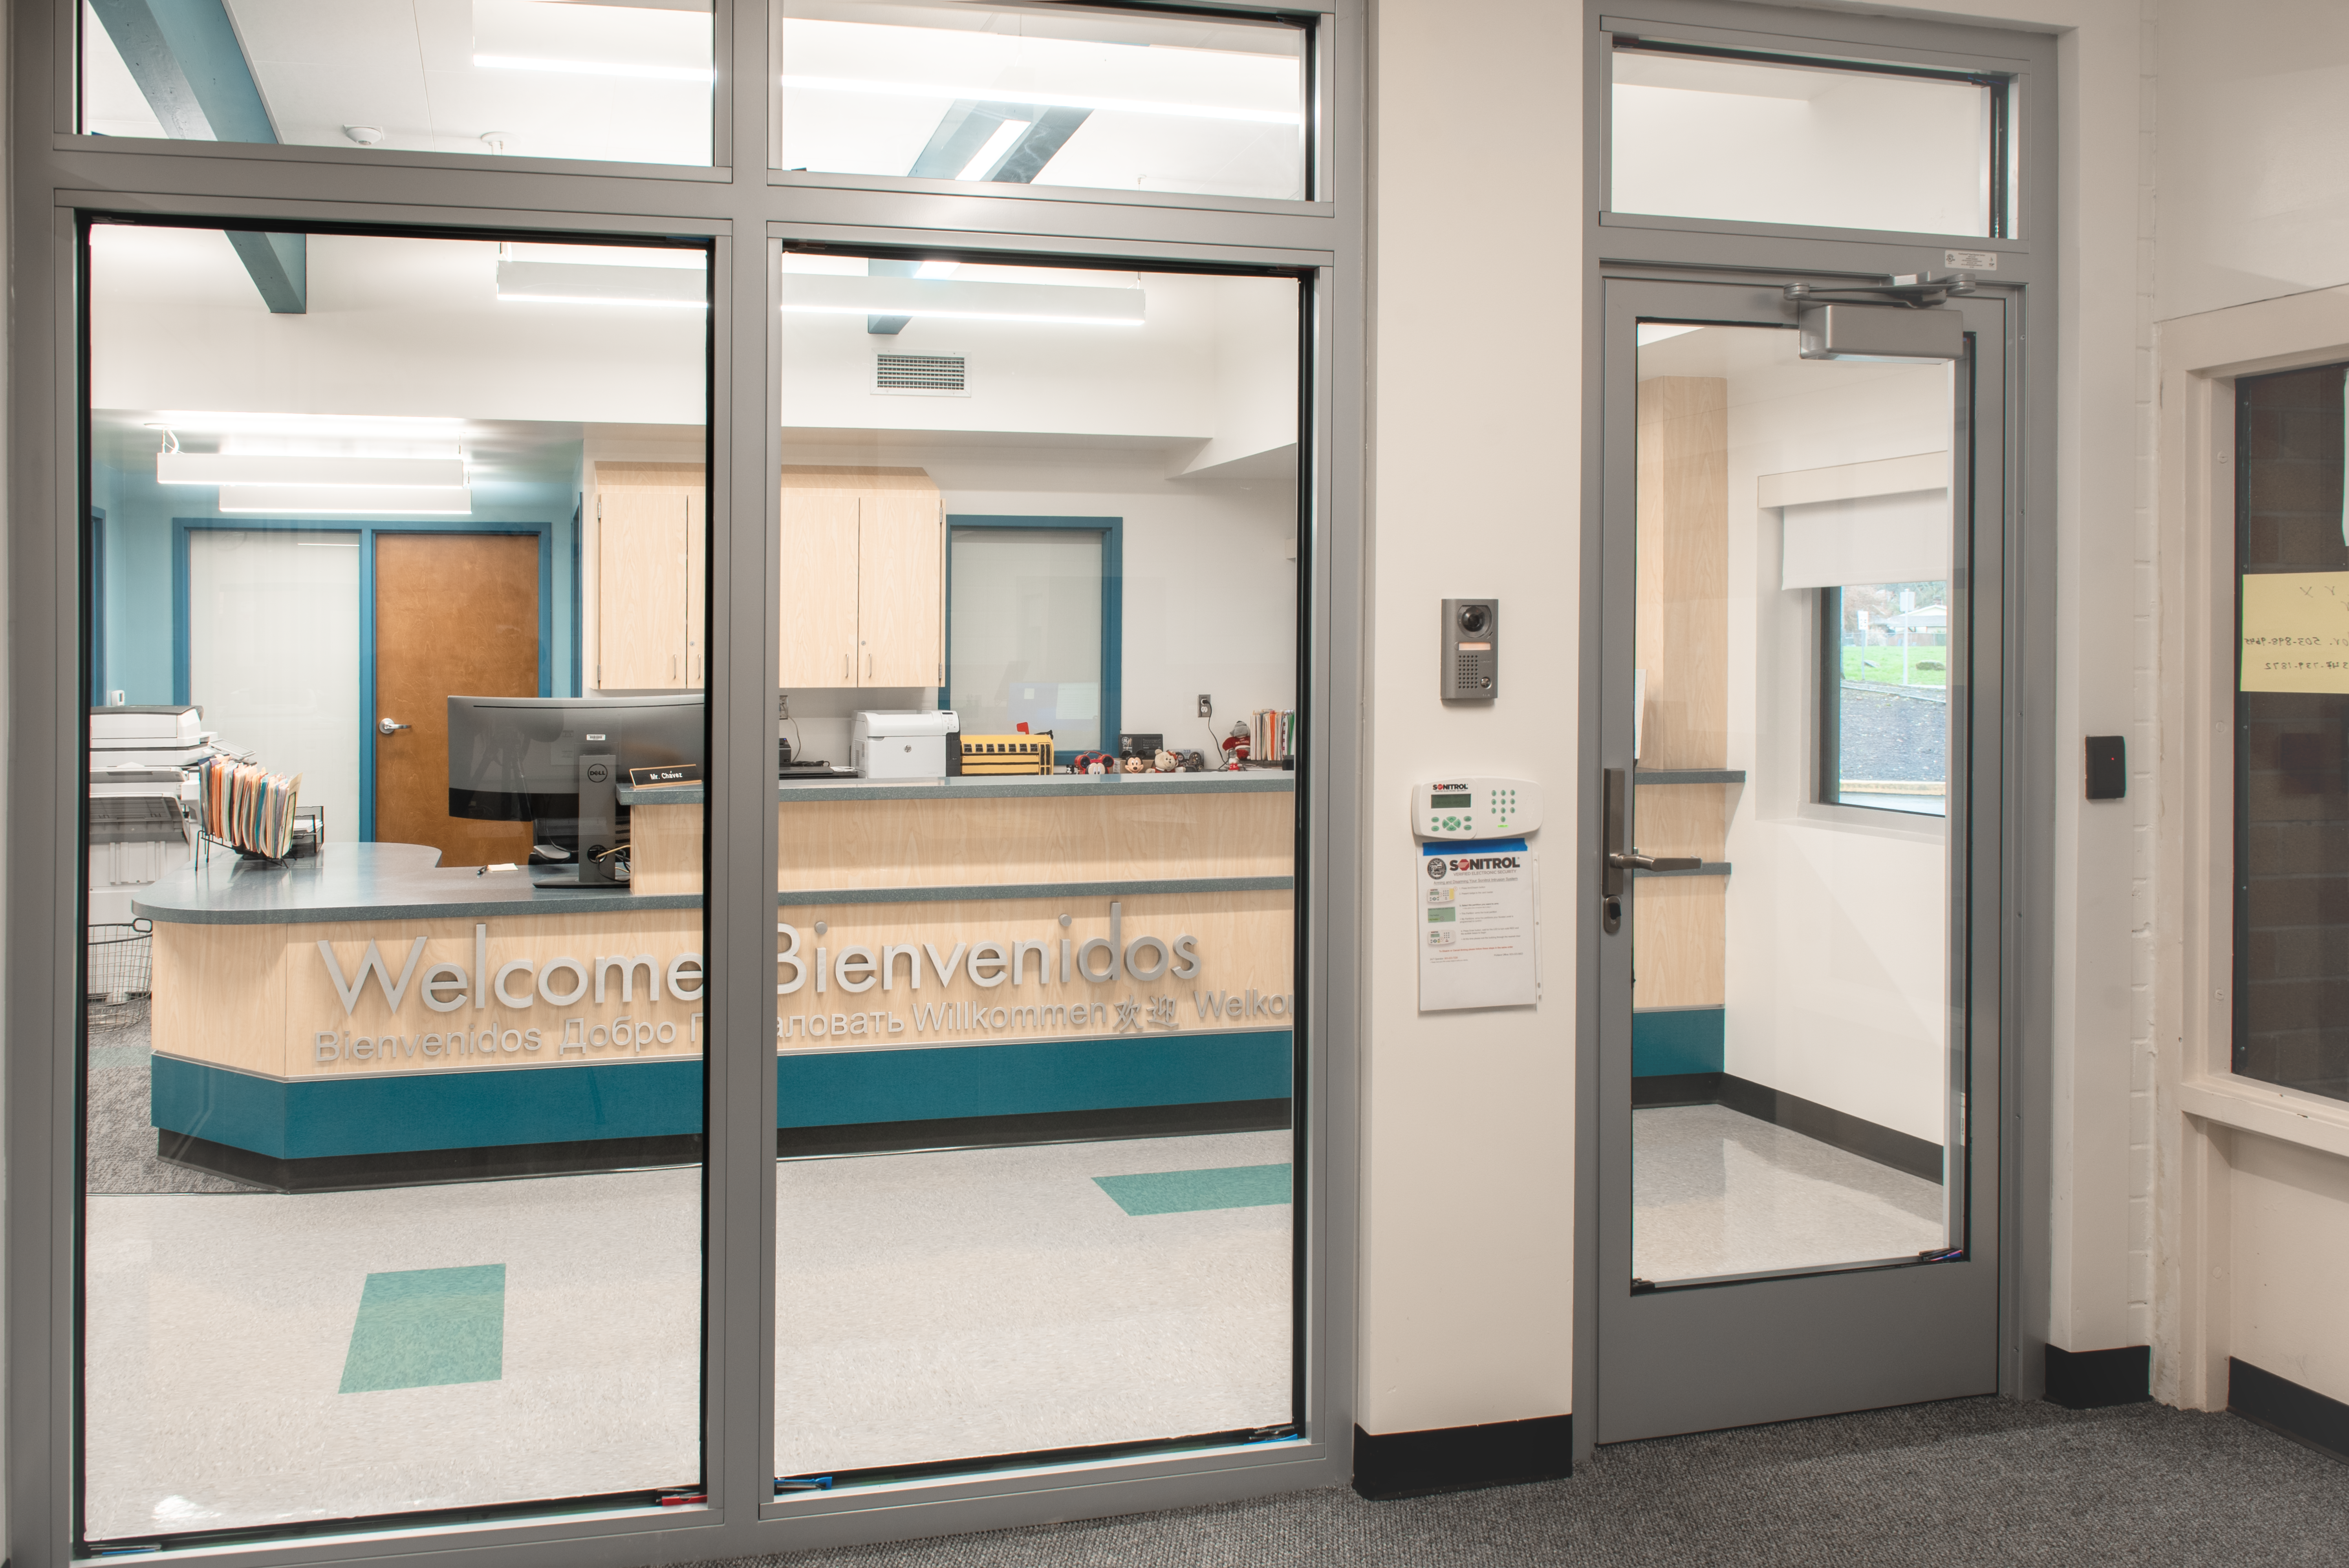 Security-rated glazing that also meets fire rating standards can bolster occupant safety in several areas of a school